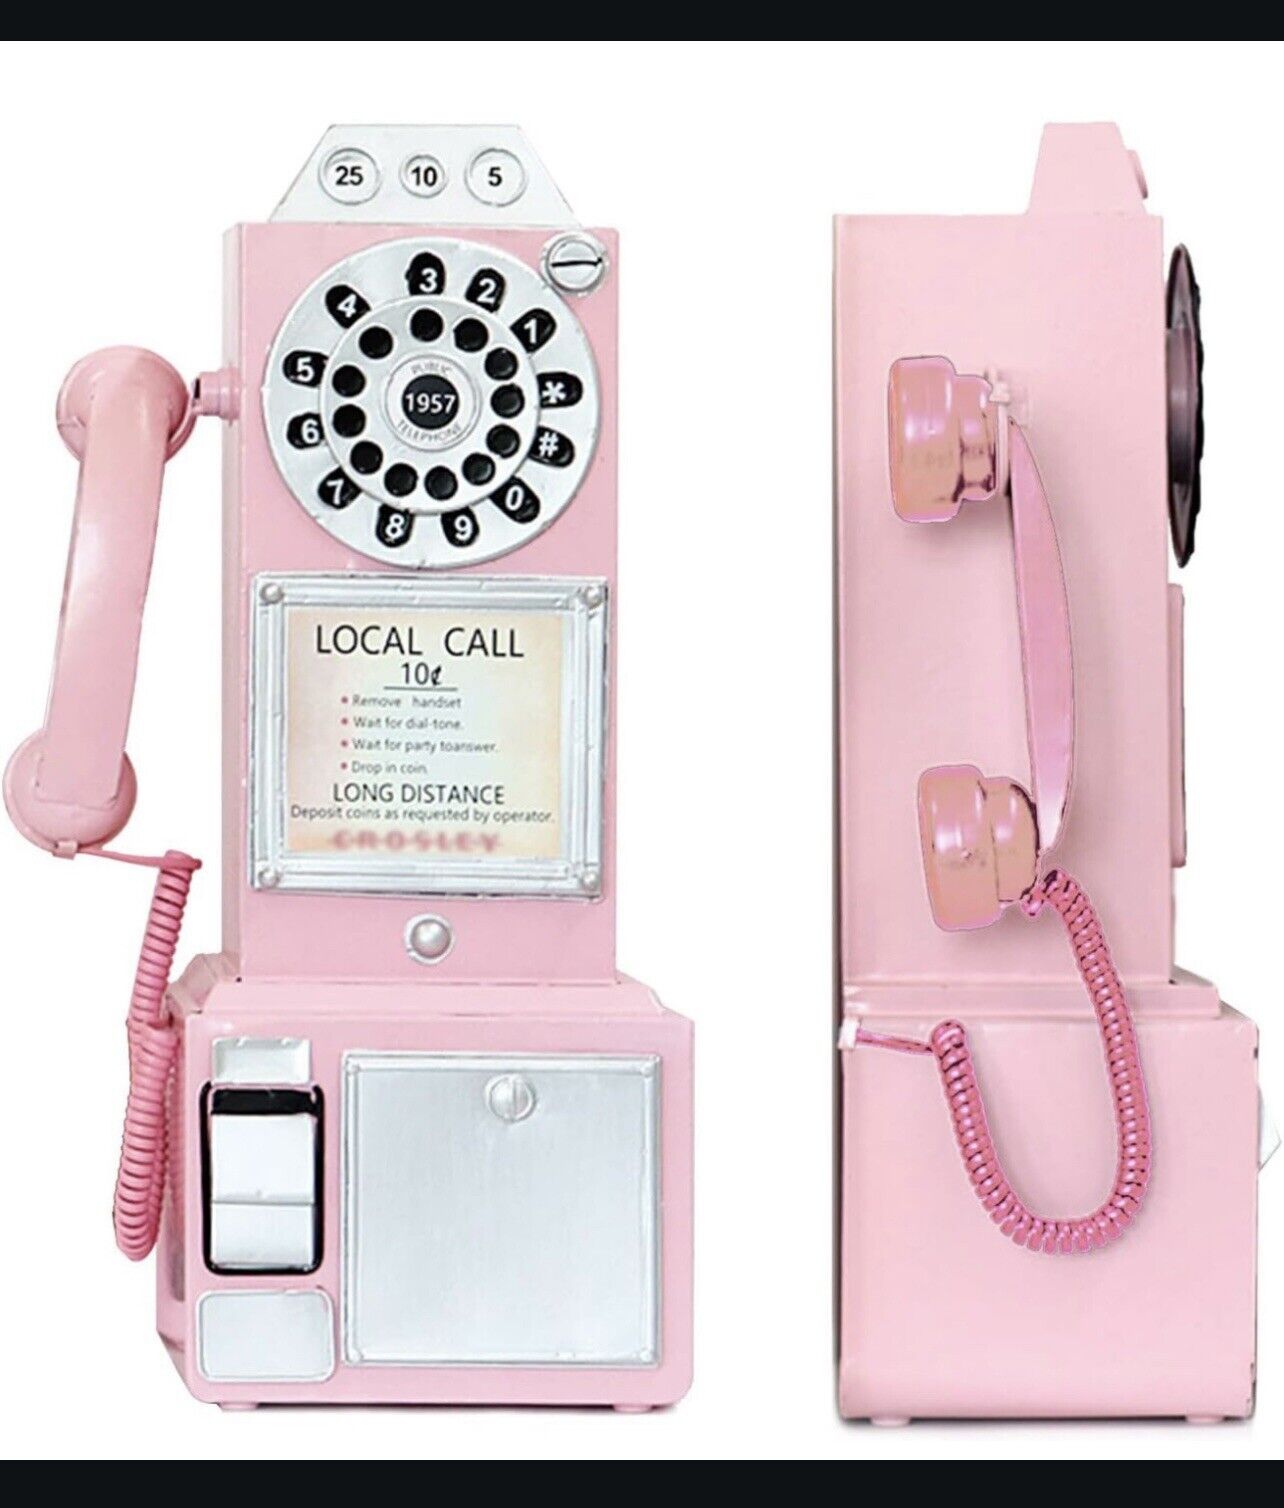 Antique Telephone - Pink Rotary Dial Landline Phone Model Vintage Pink-A Gift